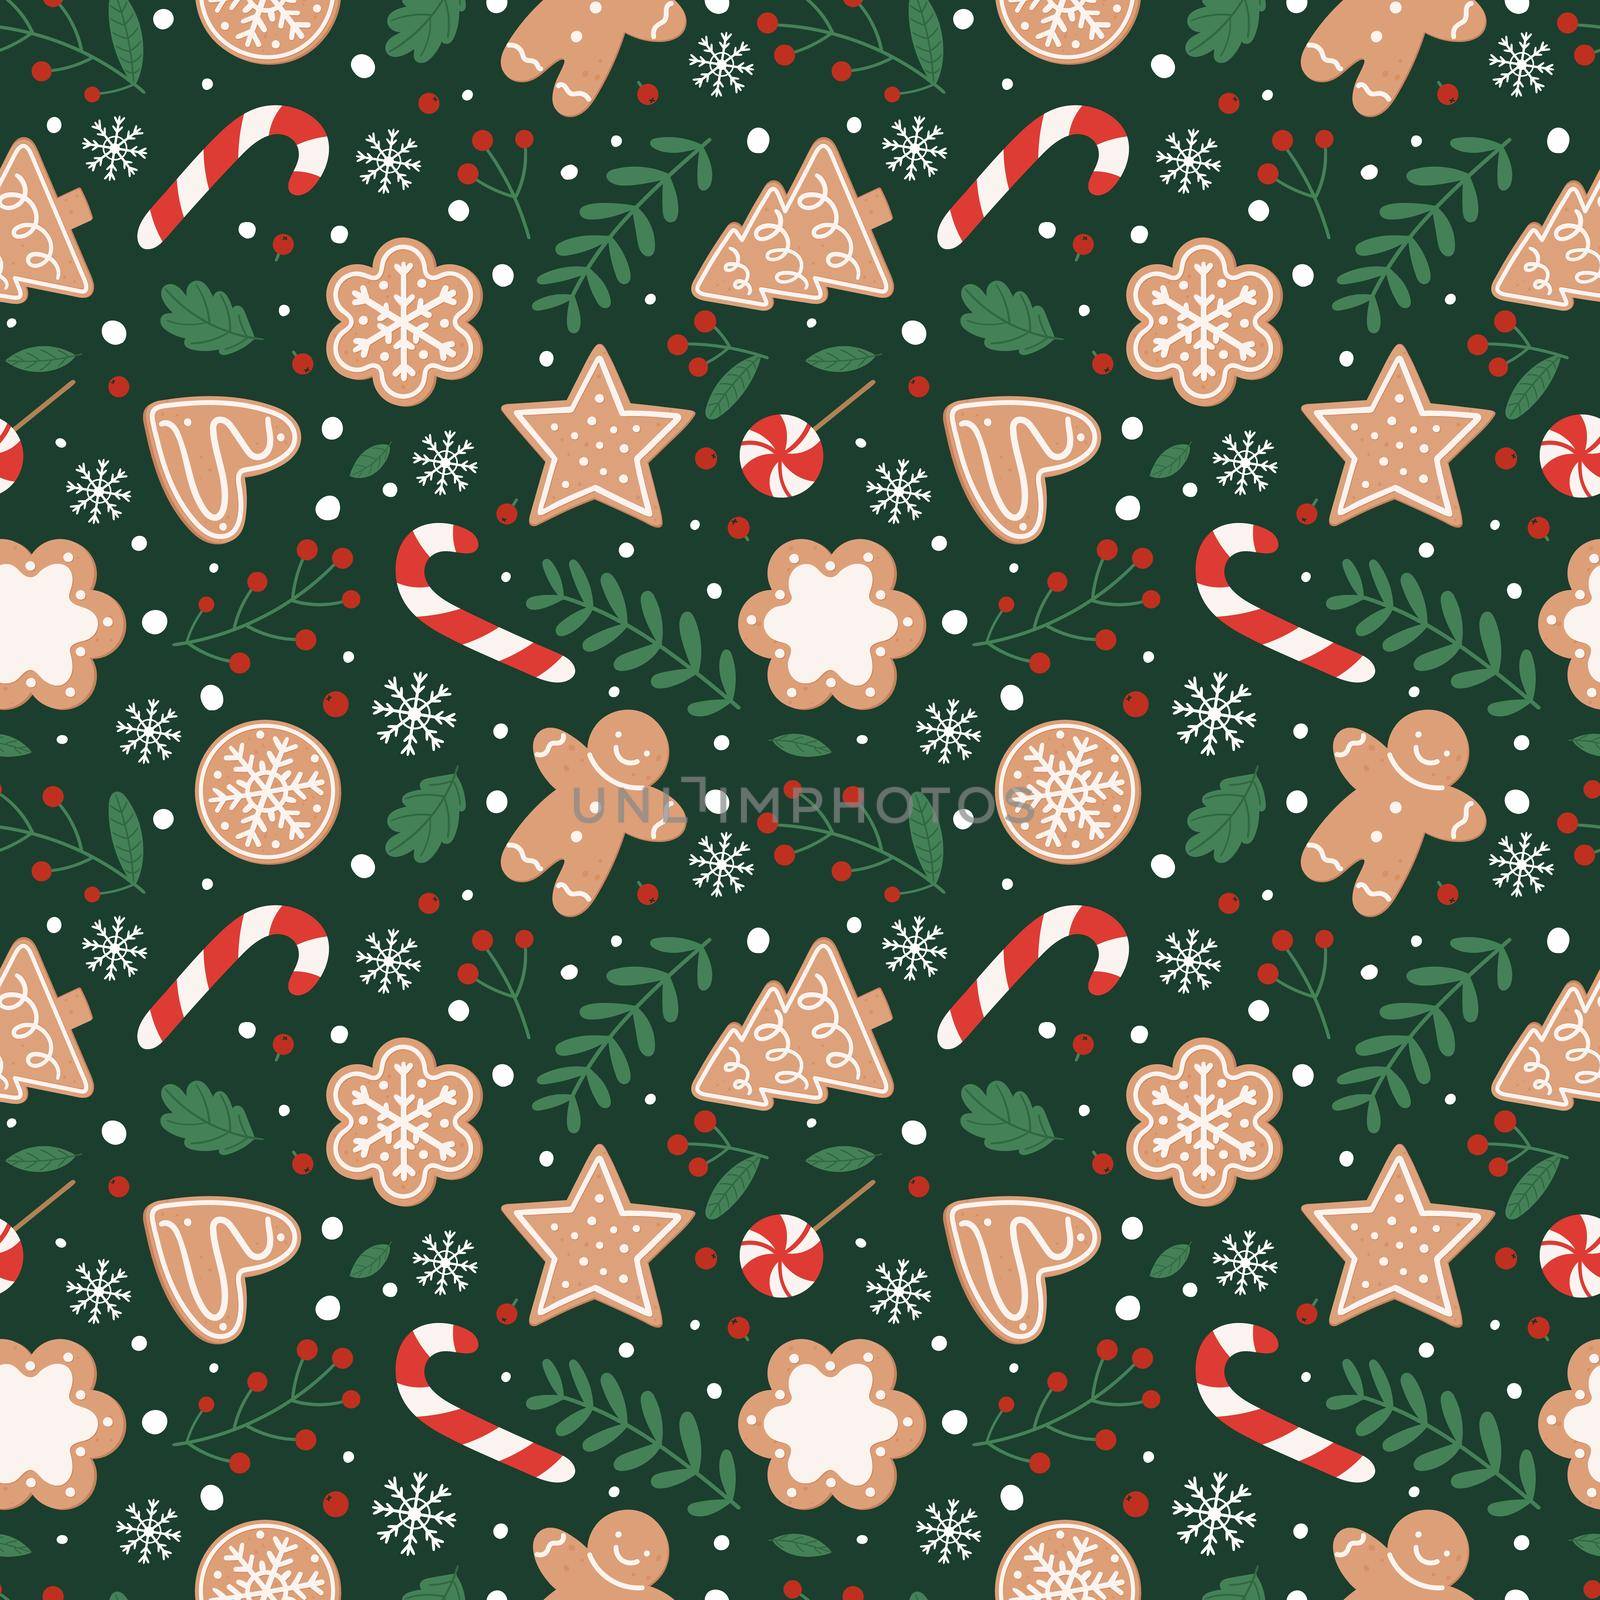 Gingerbread seamless pattern. Festive background with cookies, candies, leaves and berries. Vector illustration in flat cartoon style on green background